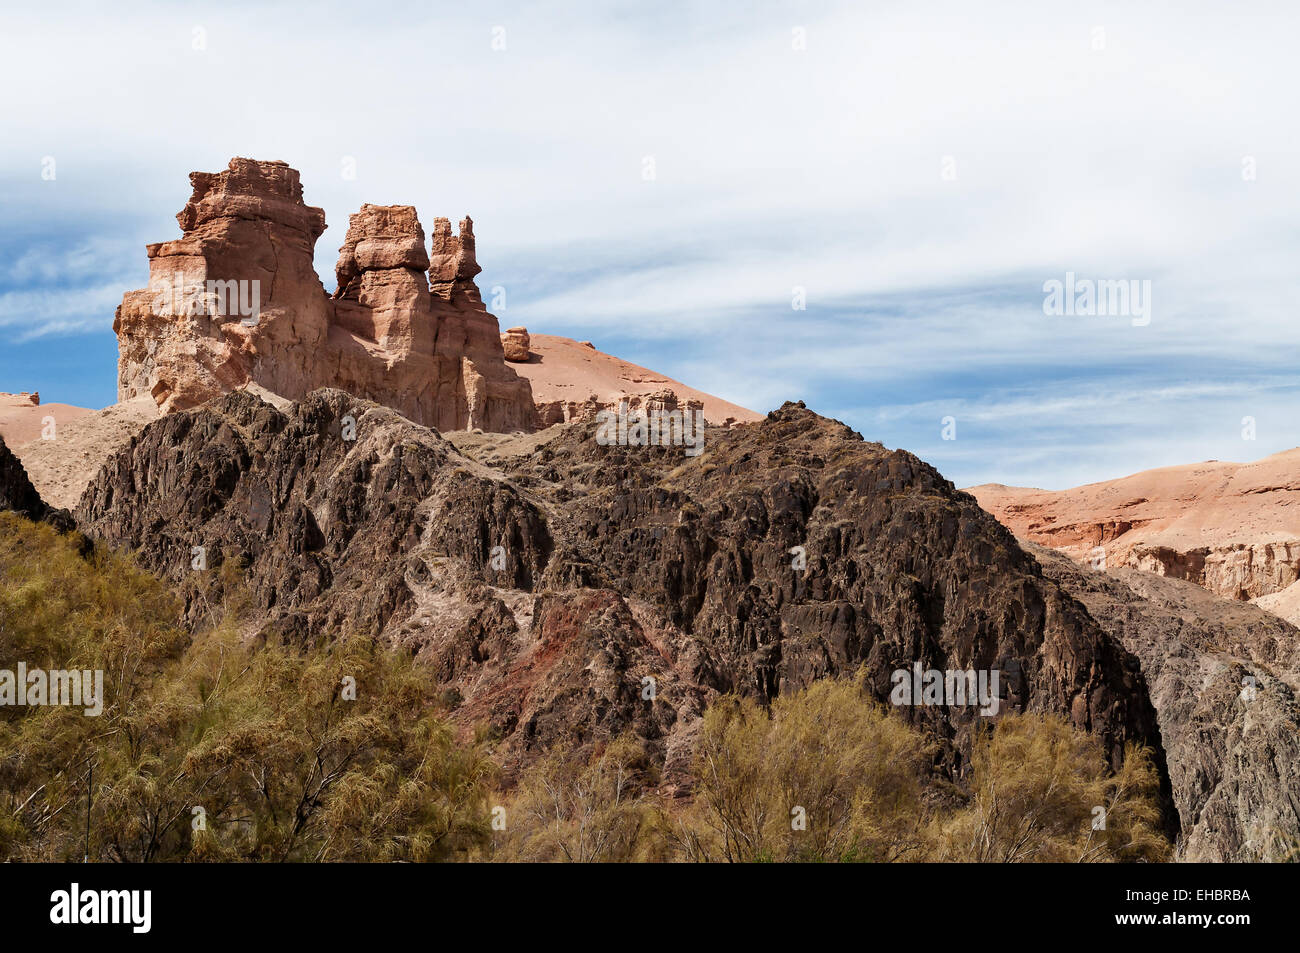 Valley of Castles in Sharyn Canyon.  Sharyn Canyon is an 80 km canyon on the Sharyn River, 200 kilometres east of Almaty. Kazakh Stock Photo